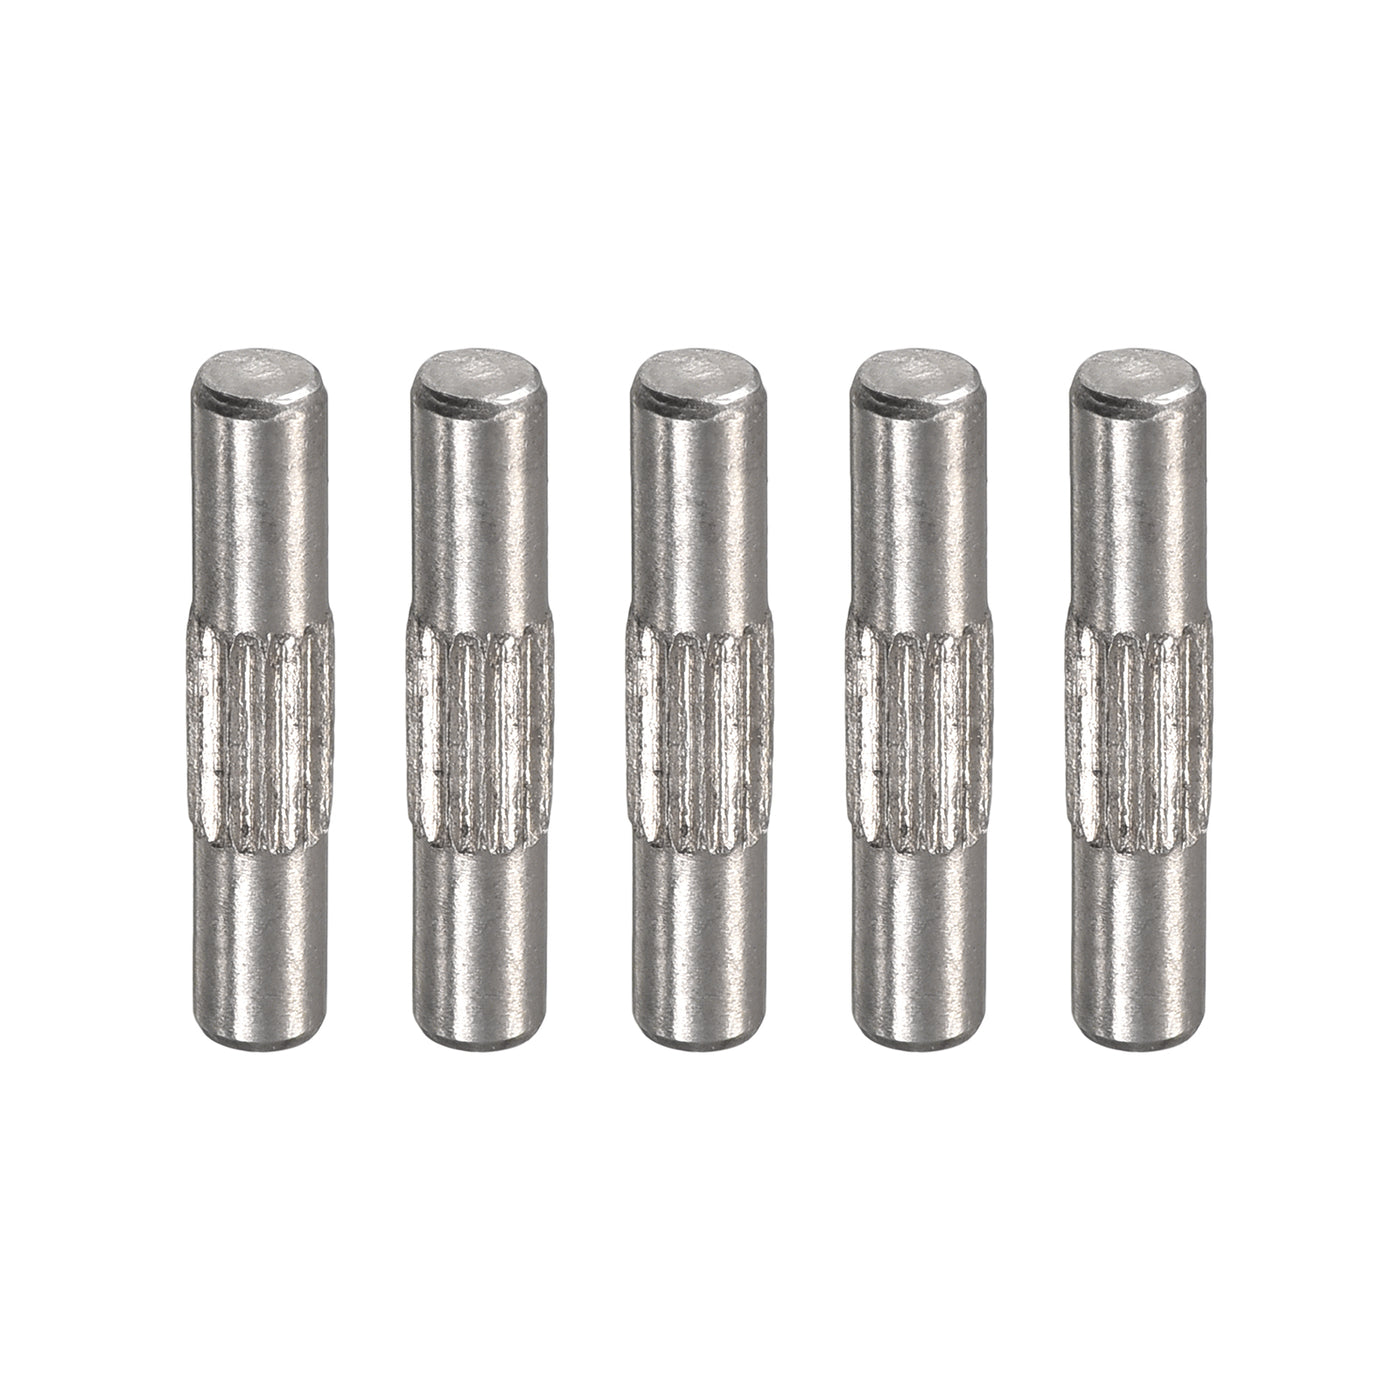 uxcell Uxcell 3x16mm 304 Stainless Steel Dowel Pins, 5Pcs Center Knurled Chamfered End Pin